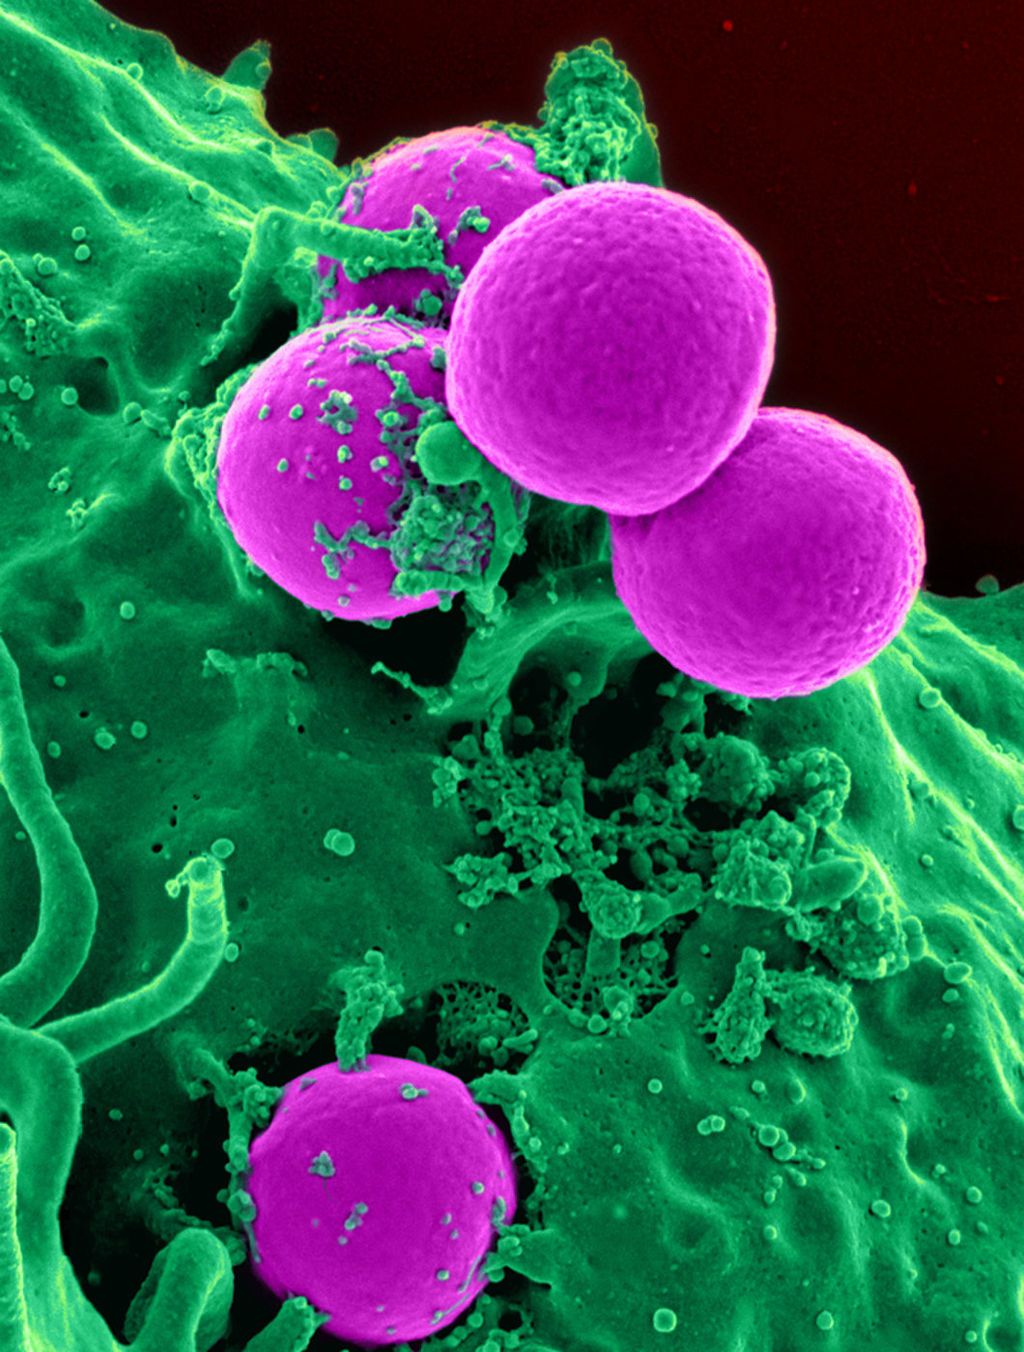 Photo caption: Agglutination of antibiotic-resistant microbial clusters